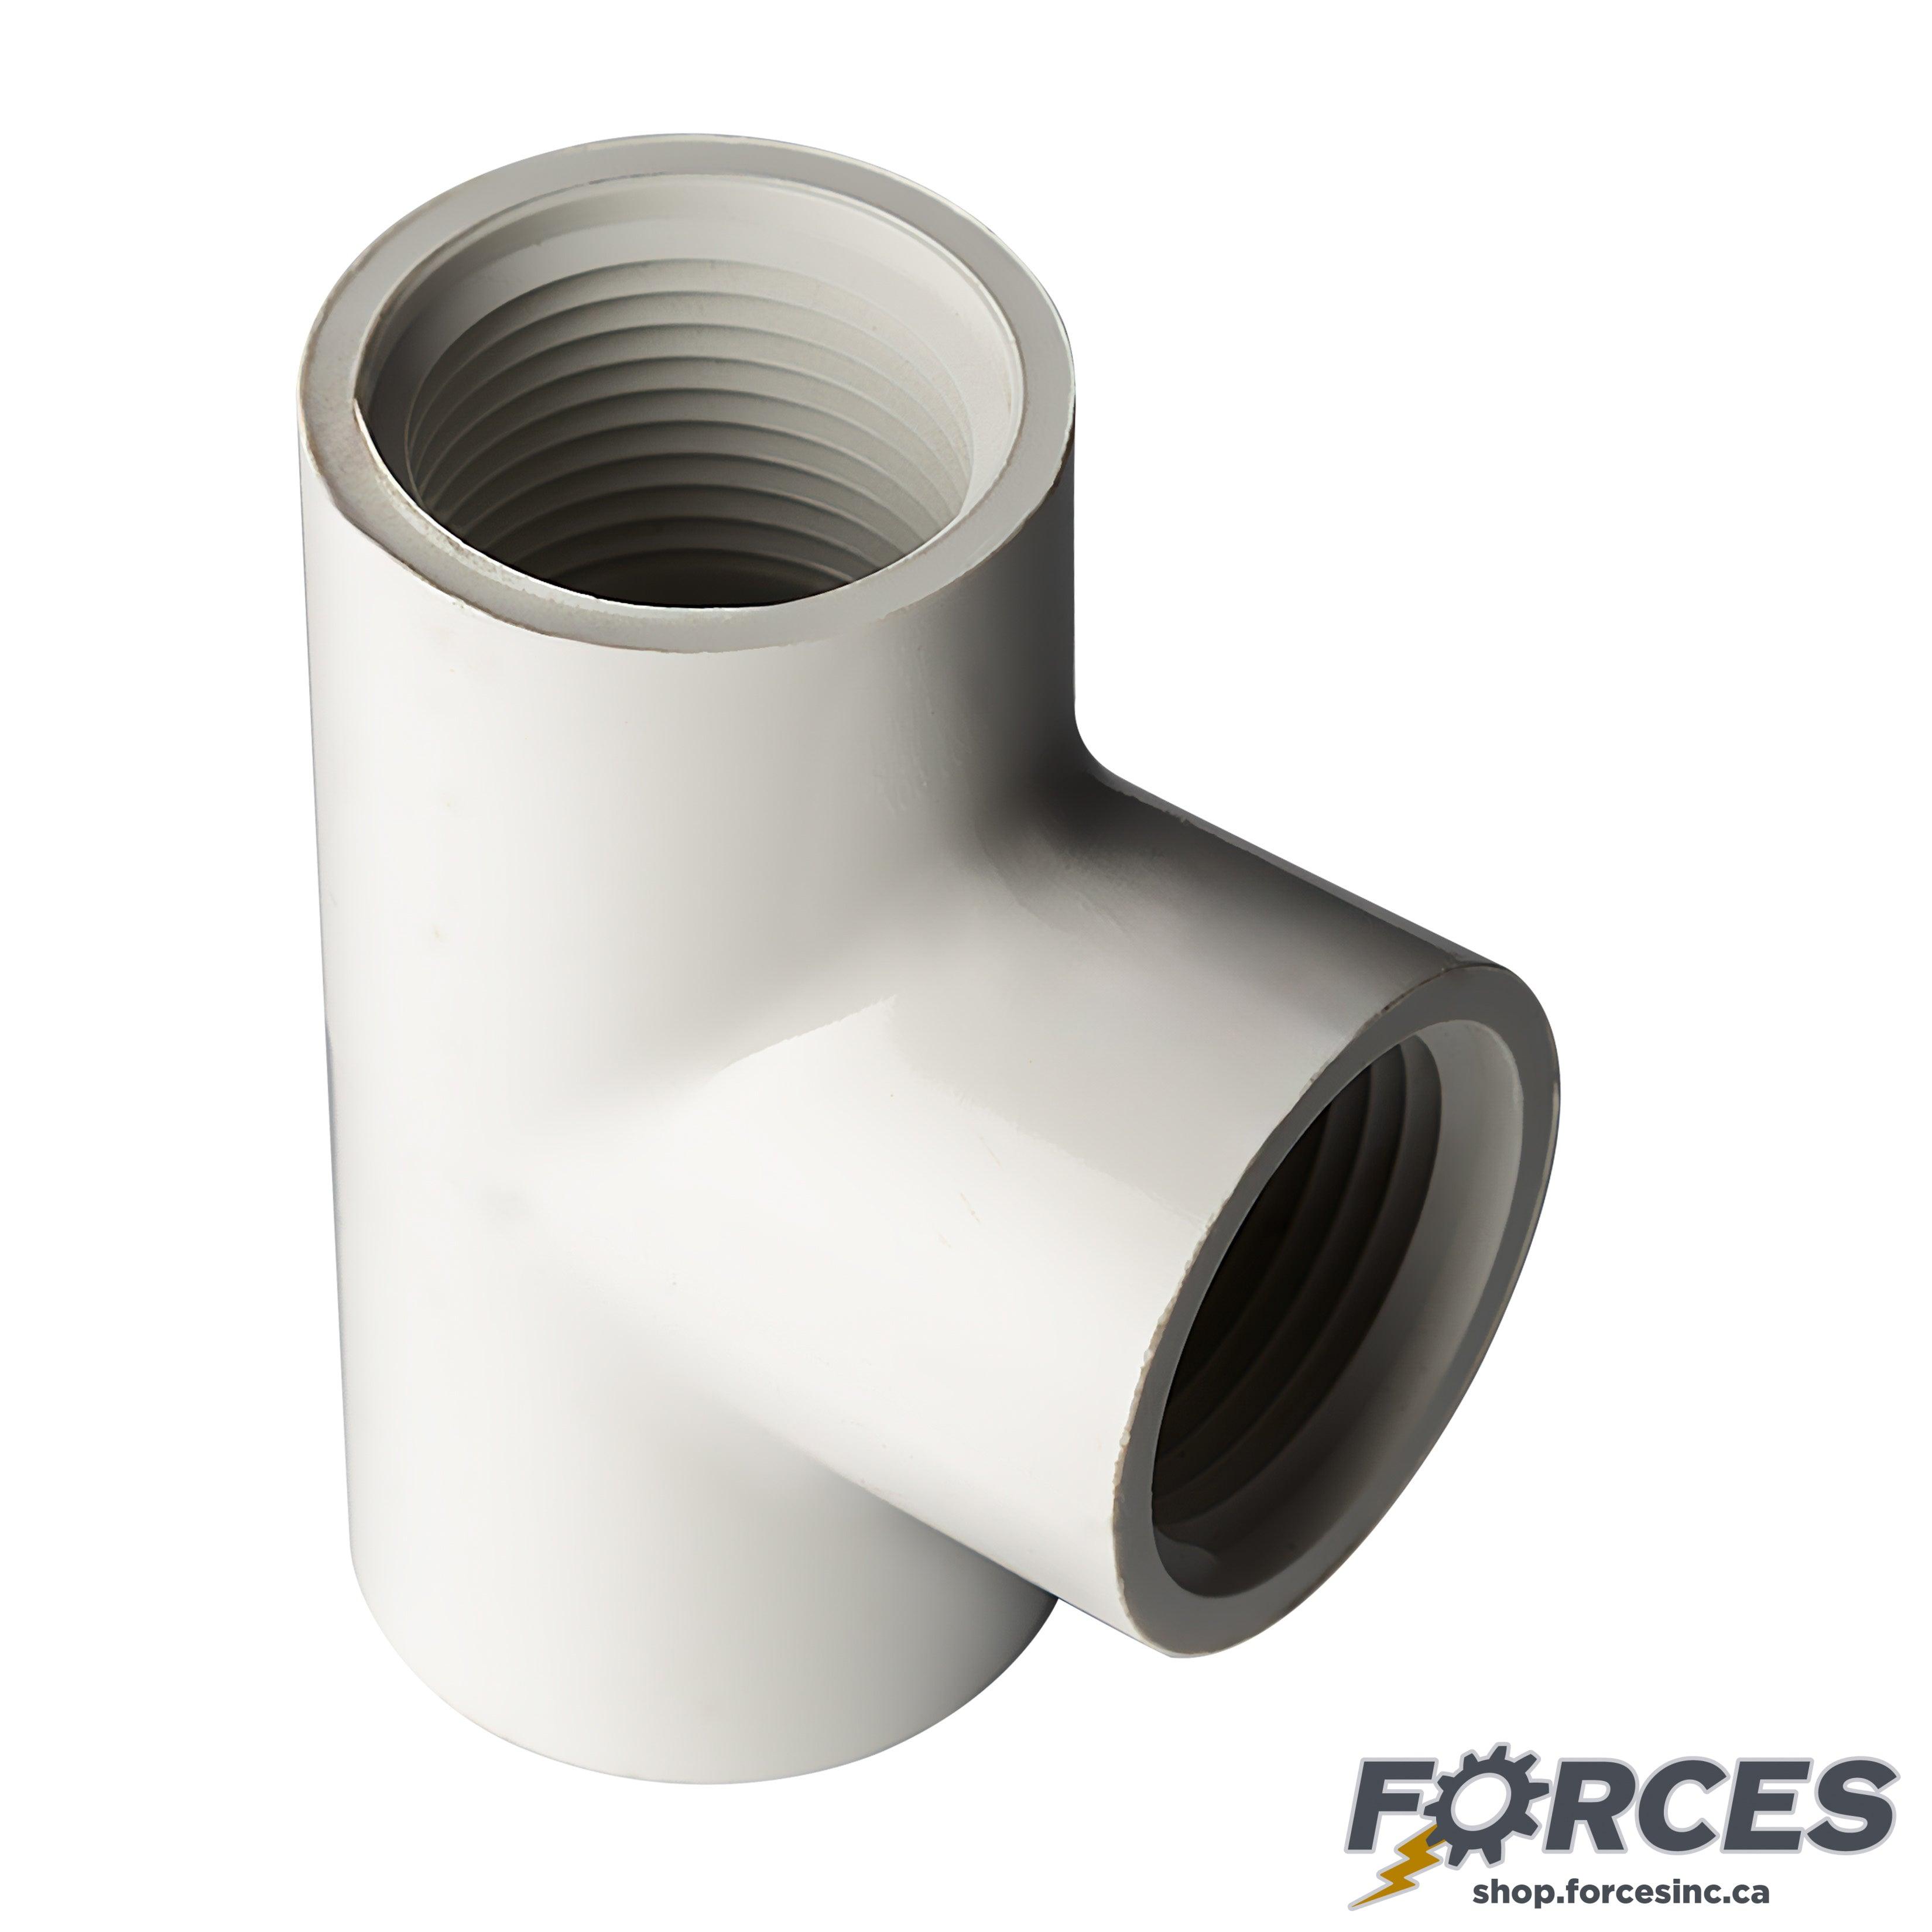 1-1/4" Tee (Threaded) Sch 40 - PVC white | 405012W - Forces Inc